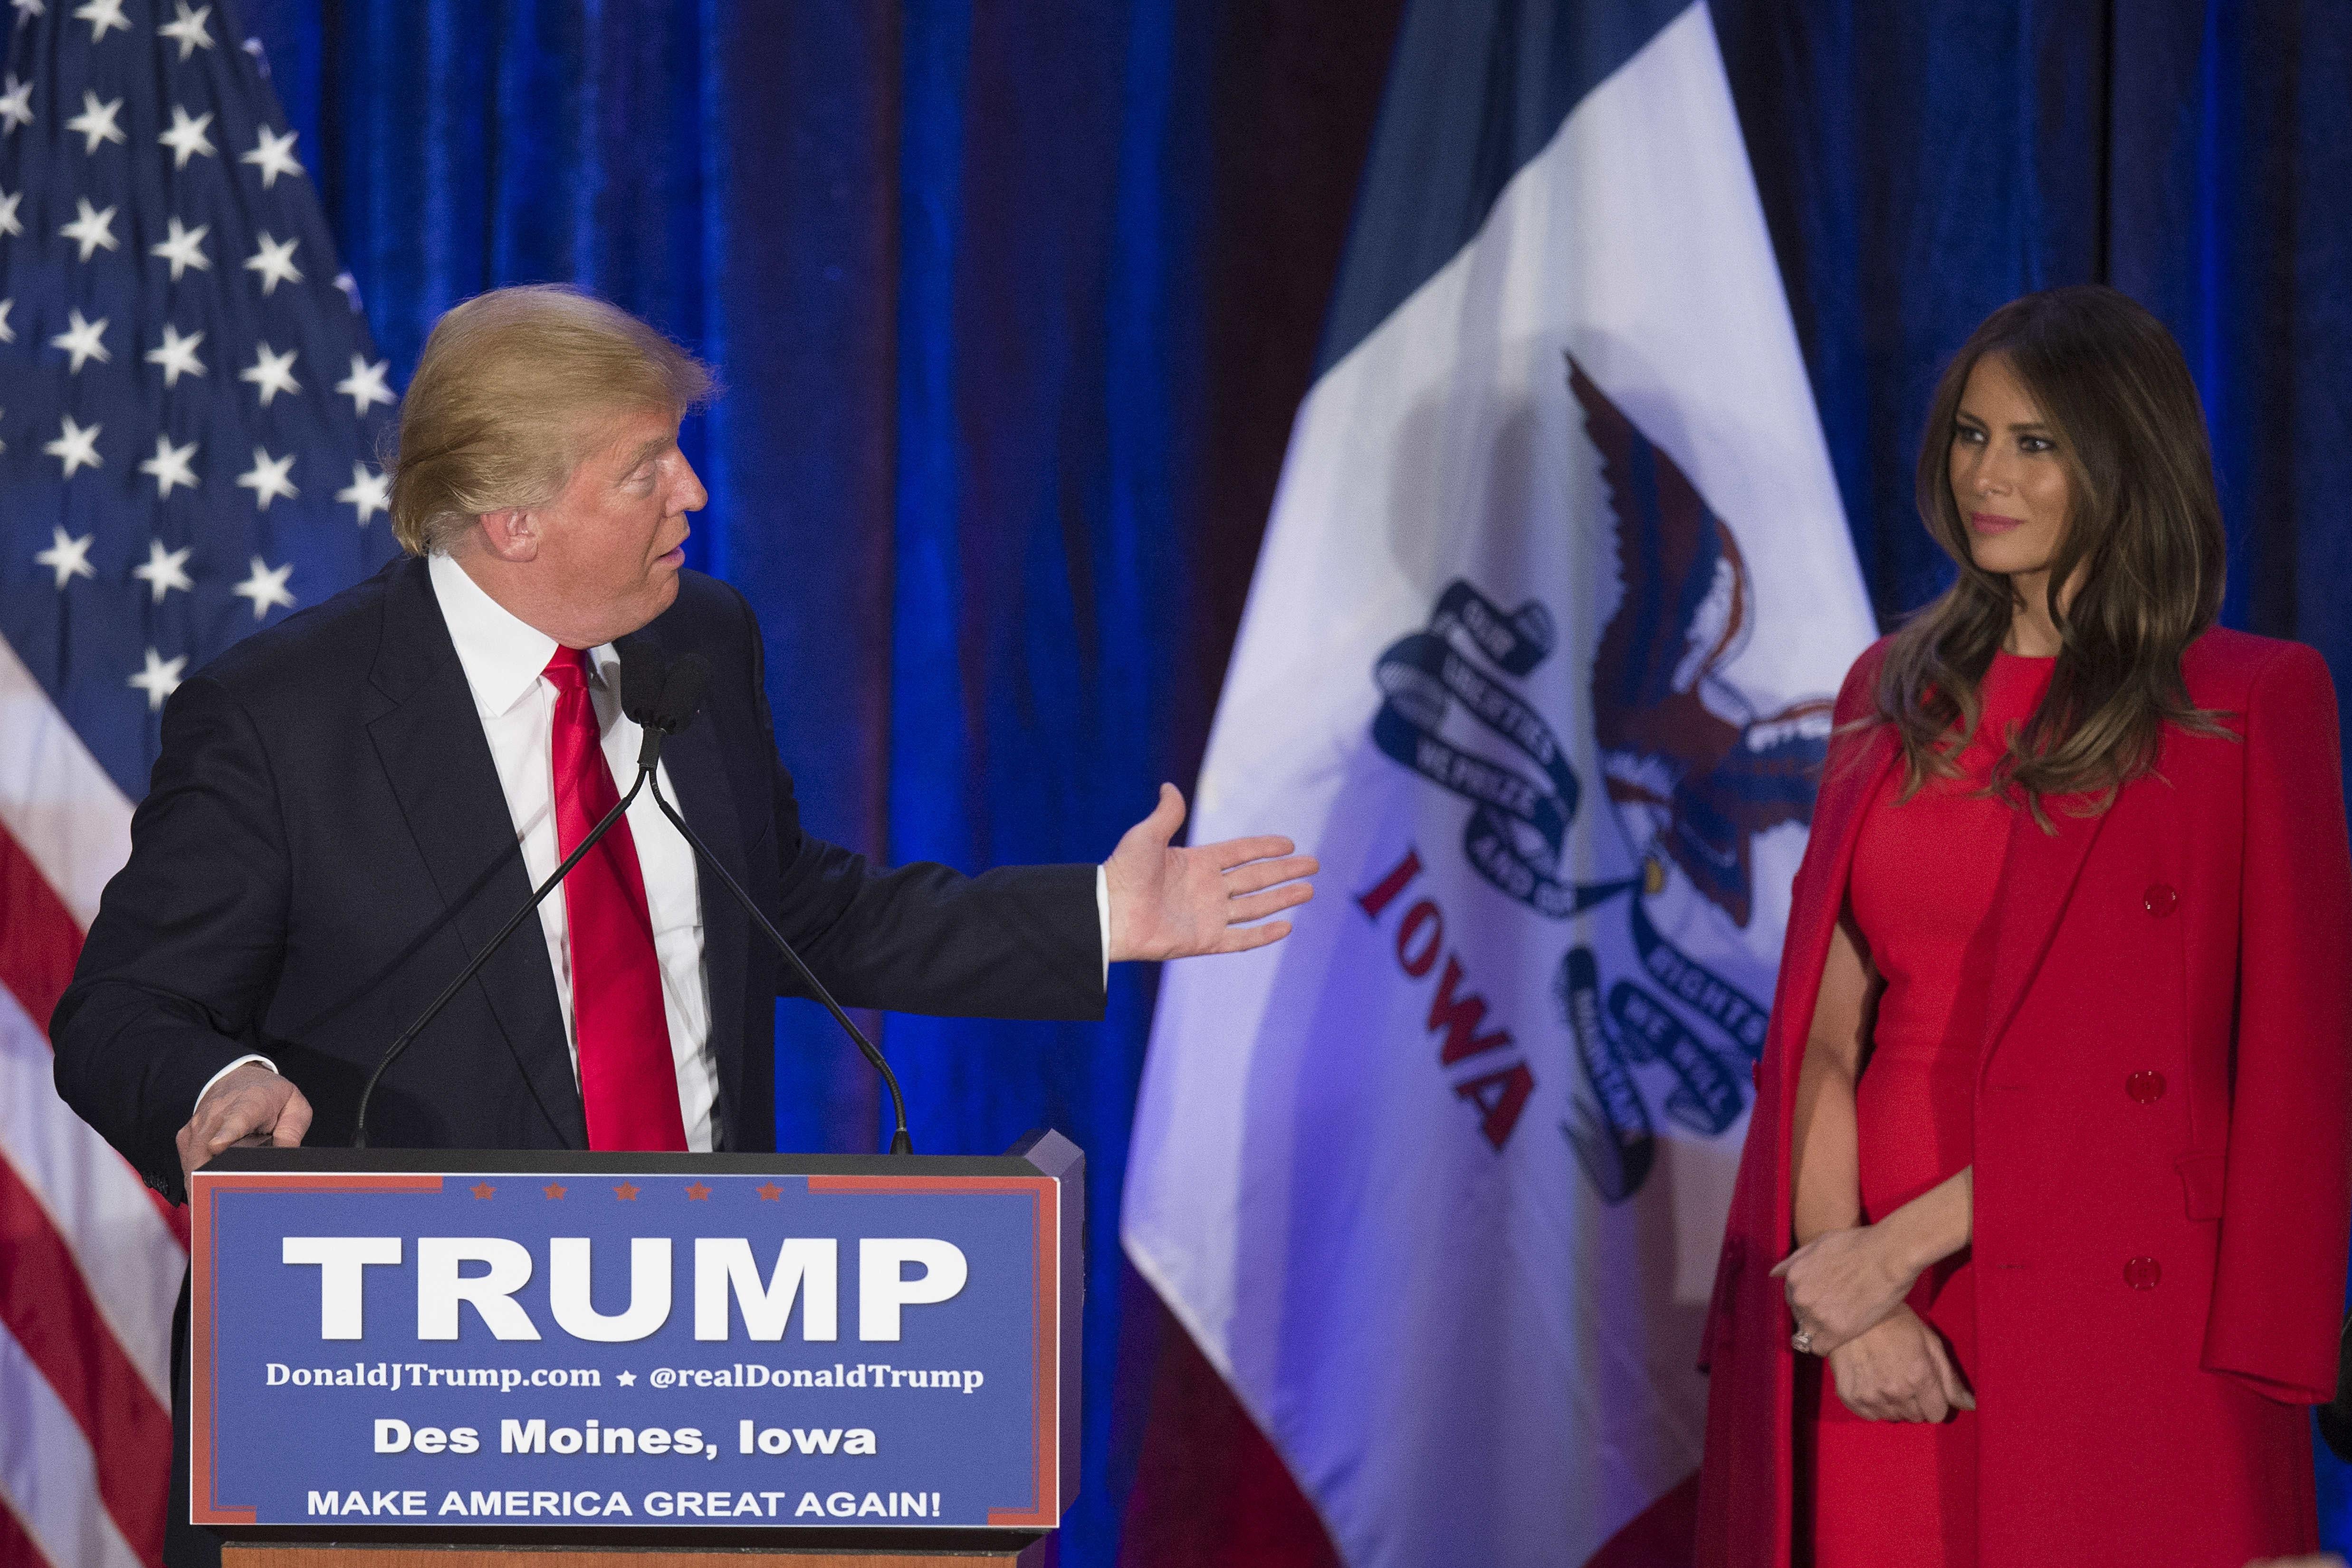 Republican Presidential candidate Donald Trump (L) thanks his wife Melania (R) as he addresses his supporters after finishing second in the Iowa Caucus, in West Des Moines, Iowa, February 1, 2016.  
Republican Senator Ted Cruz has won the Iowa caucuses -- the first vote in the US presidential race -- in a tight contest with frontrunner Donald Trump and Senator Marco Rubio, US media projections showed. / AFP / Jim WATSON        (Photo credit should read JIM WATSON/AFP/Getty Images)